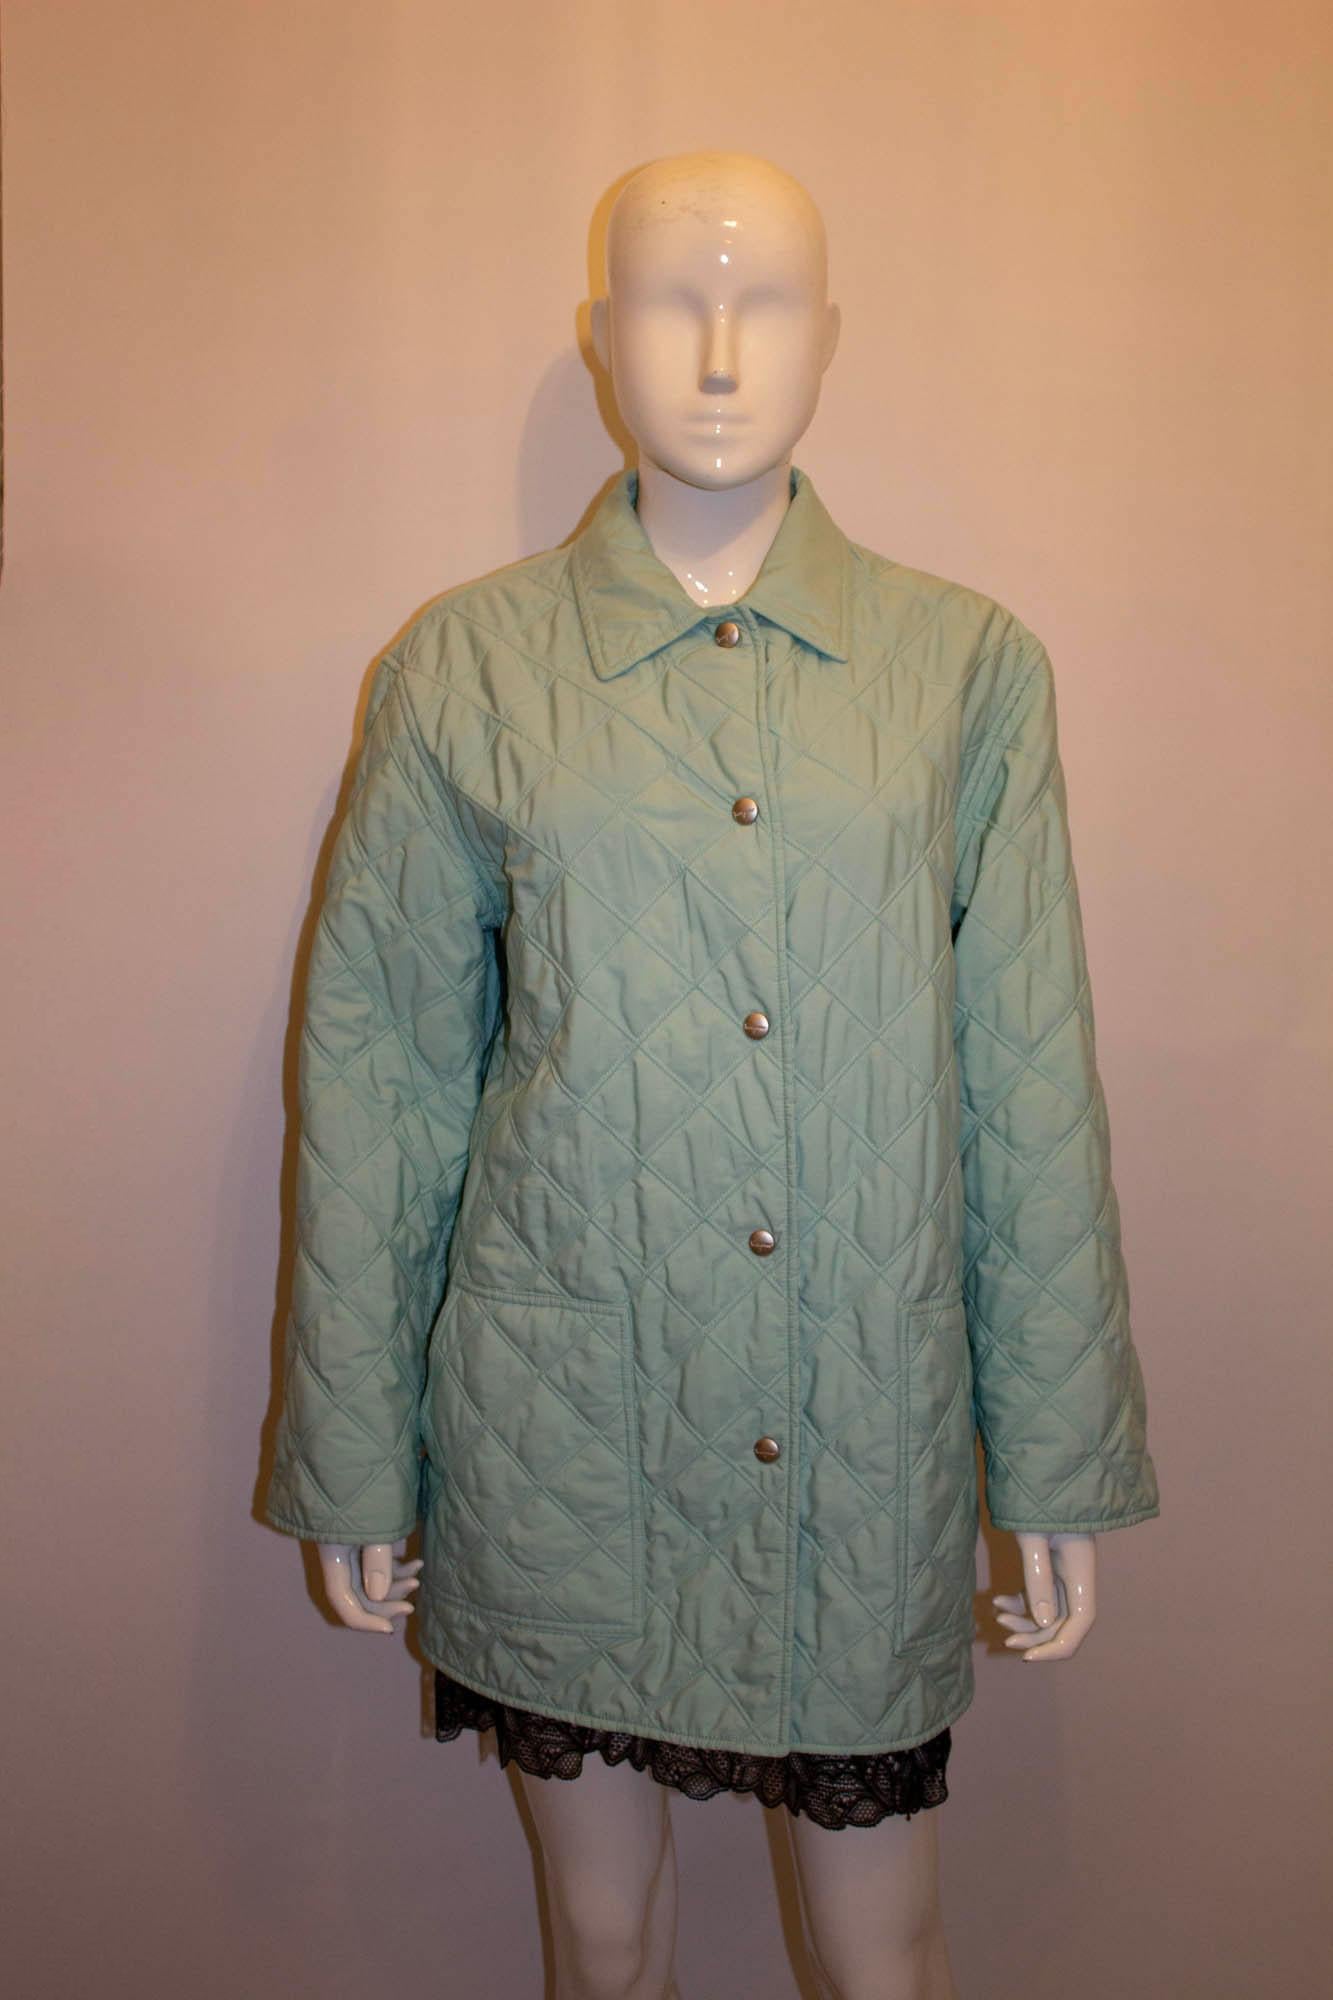 Ferragamo Spring Jacket In Good Condition For Sale In London, GB